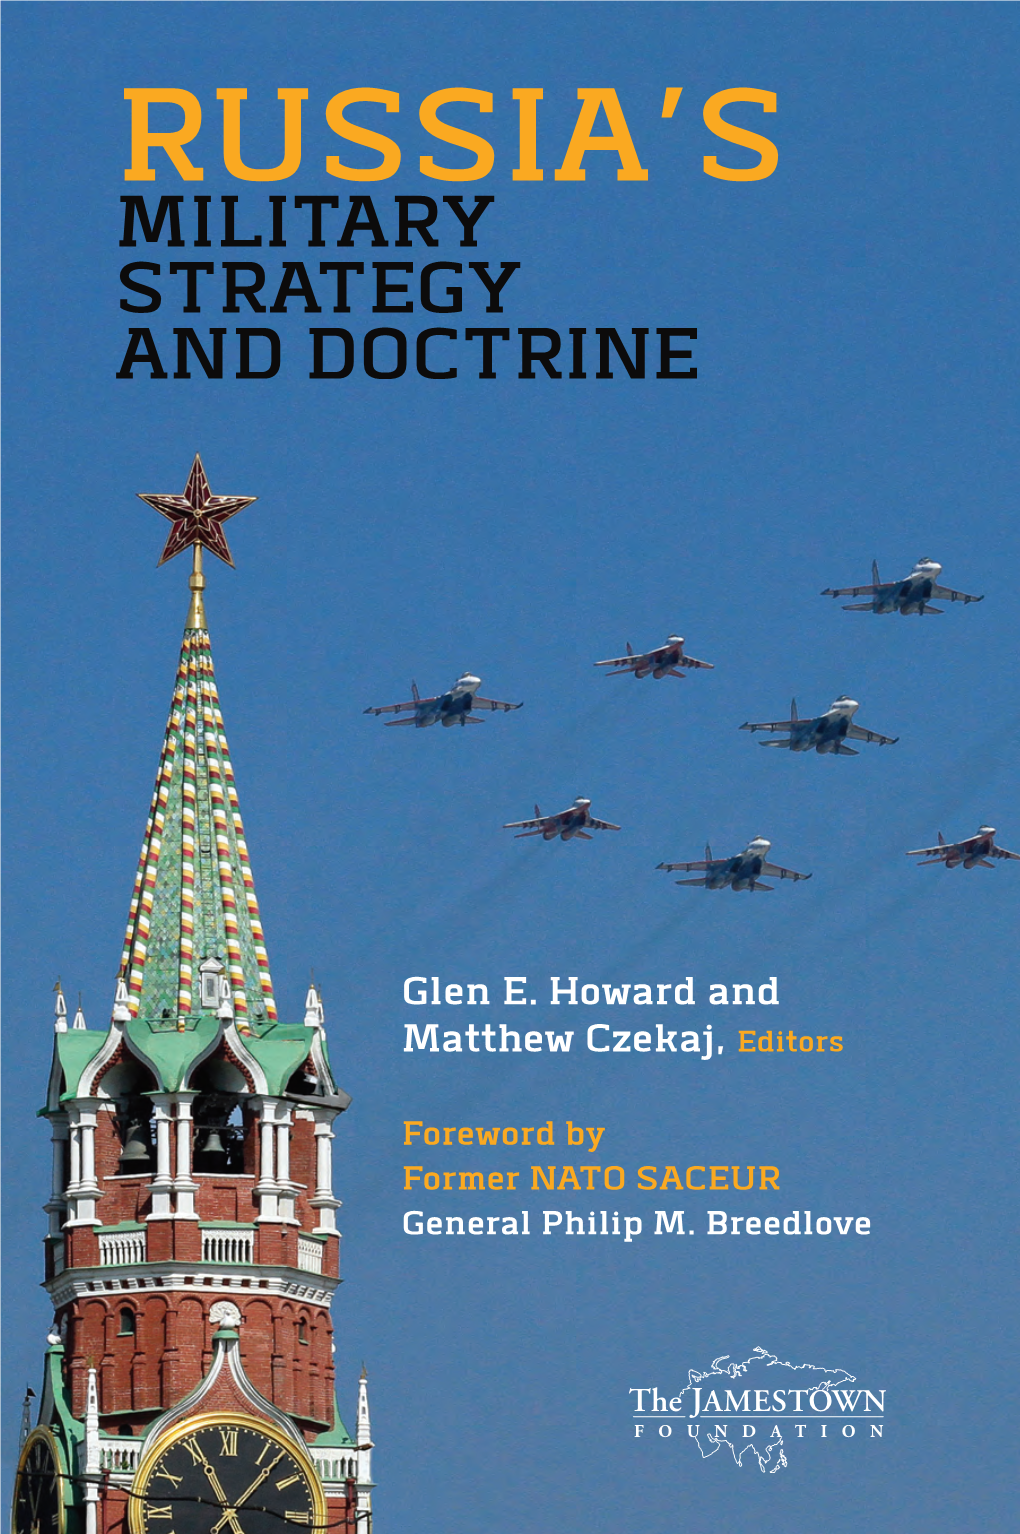 Military Strategy and Doctrine